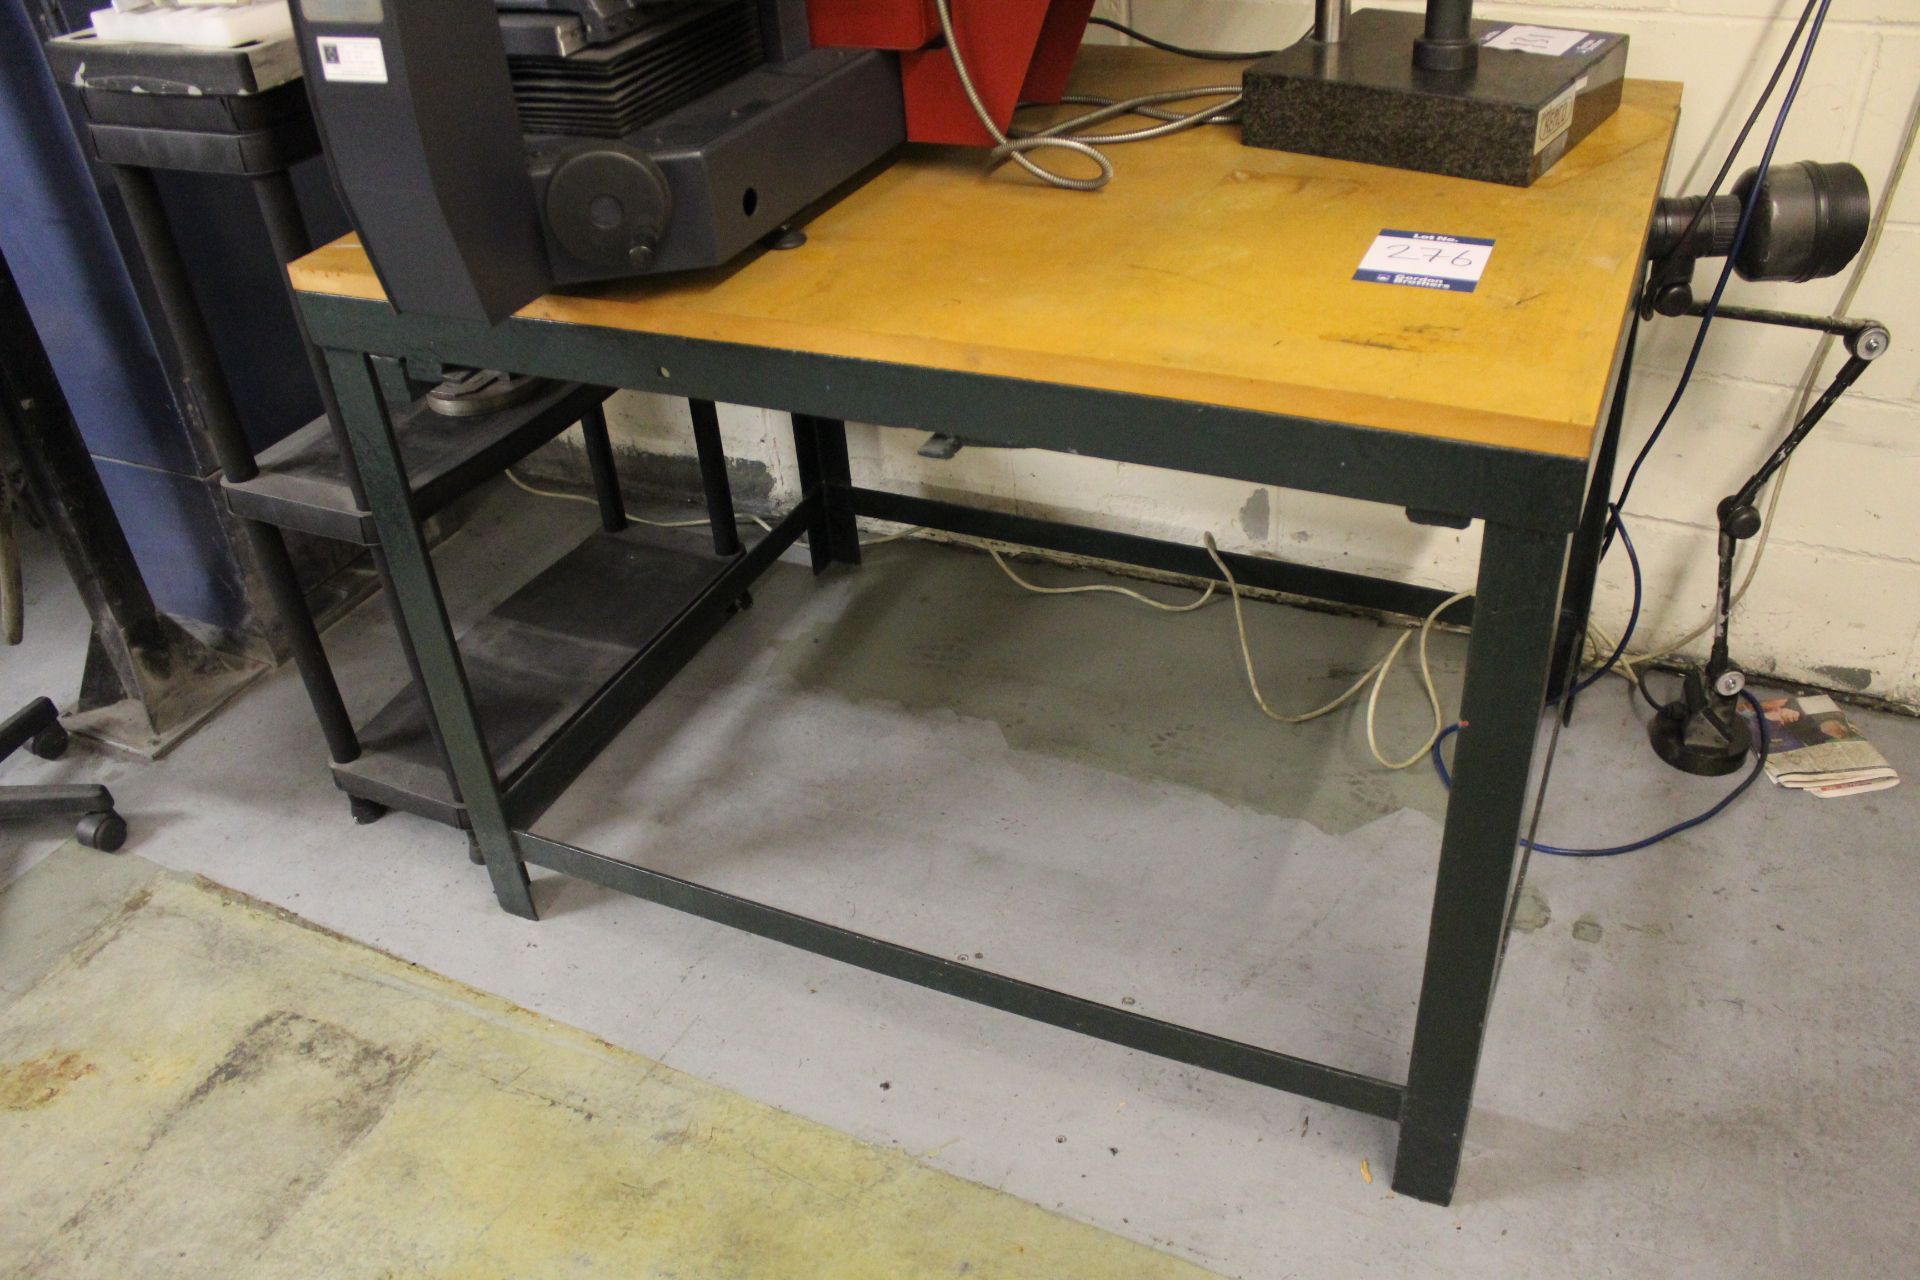 Steel framed workbench, size: 1,220mm x 910mm x 880mm (CONTENTS NOT INCLUDED)